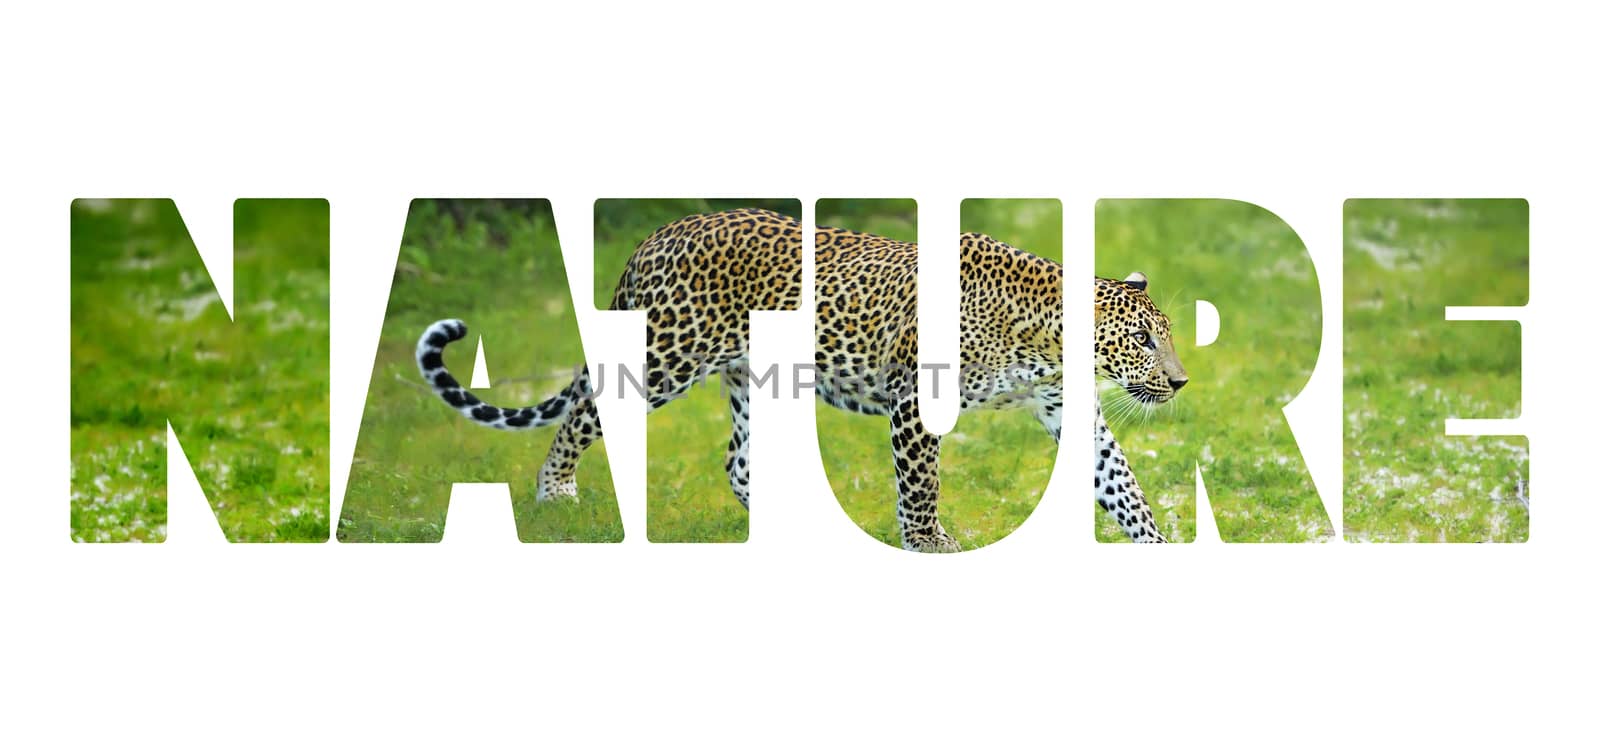 Background with word "Nature". Letters are made of leopard